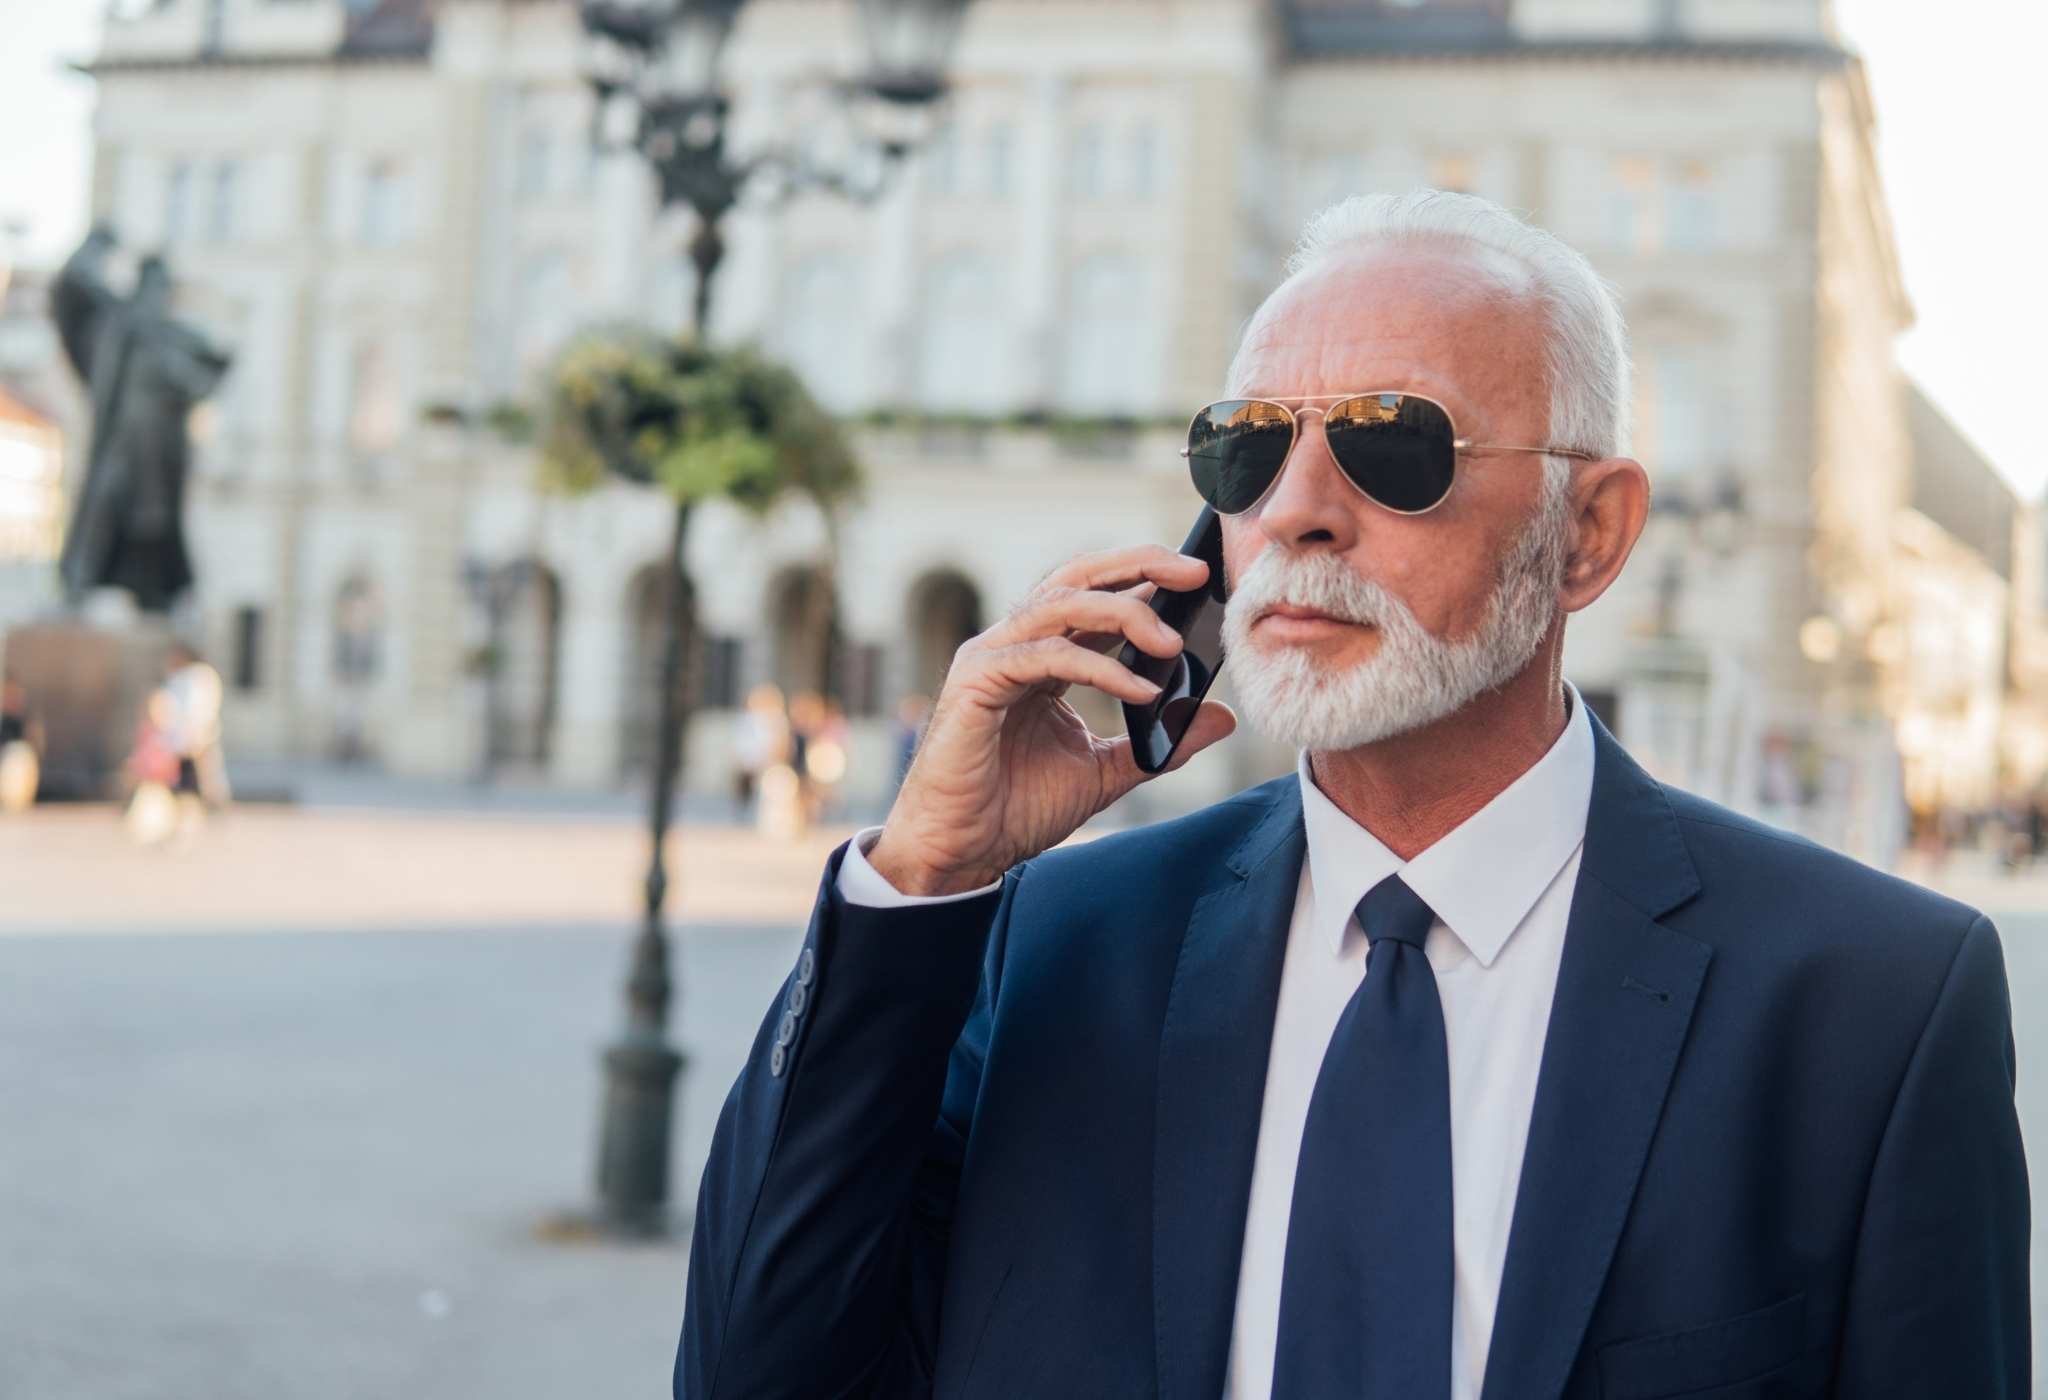 a man using technology to look sharp over 50